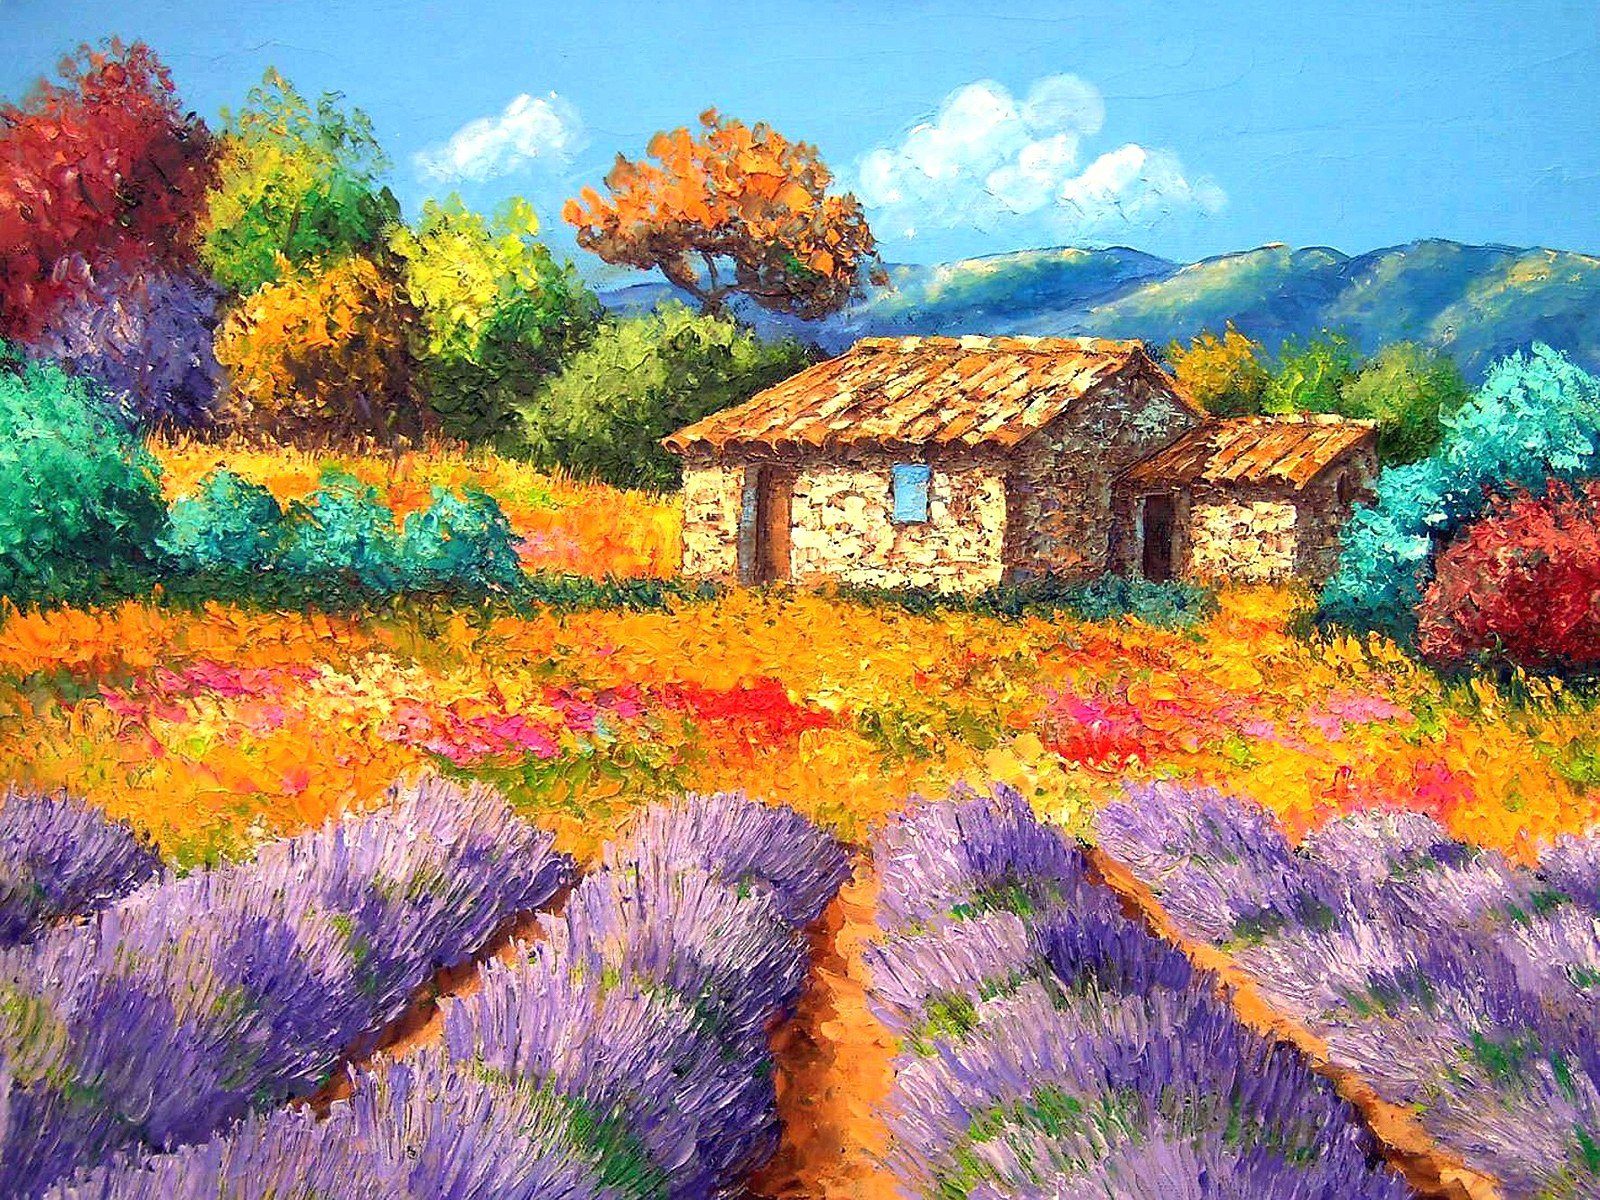 art painting wallpapers Wallpapers - Free art painting wallpapers ...